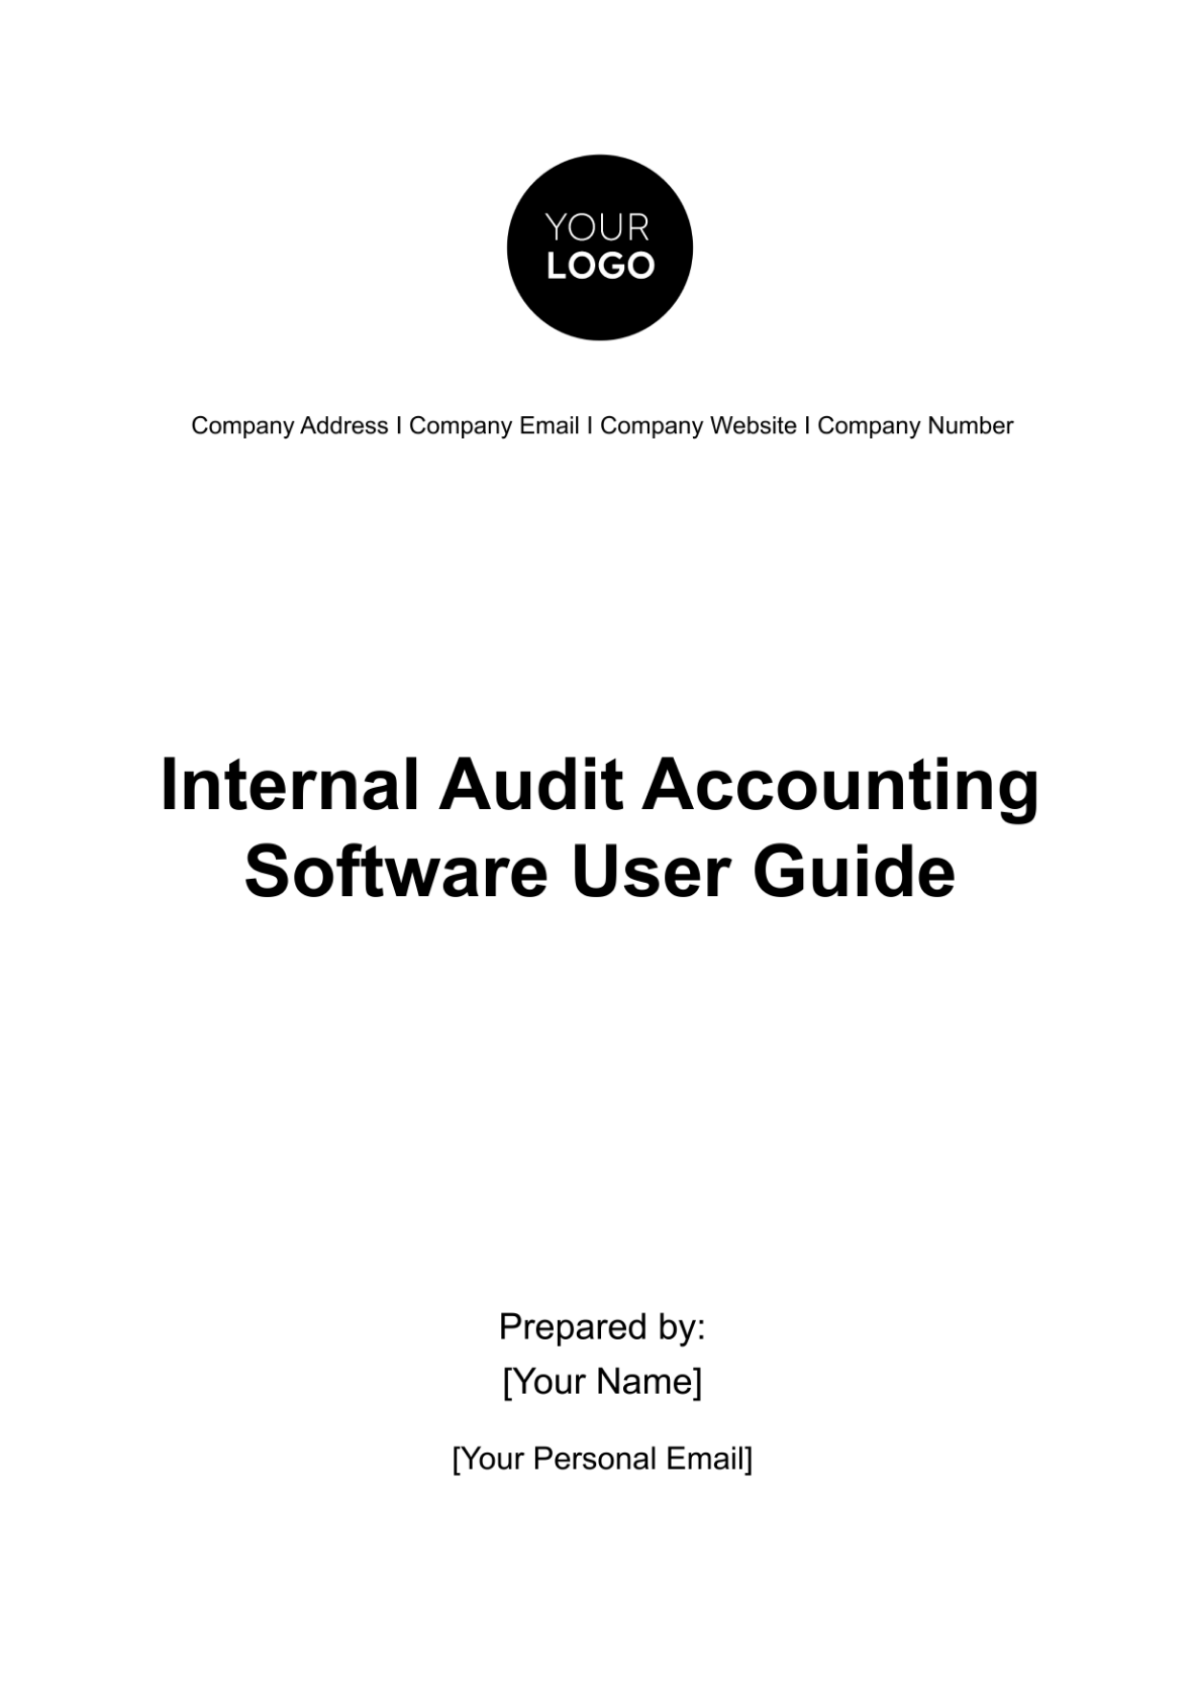 Internal Audit Accounting Software User Guide Template